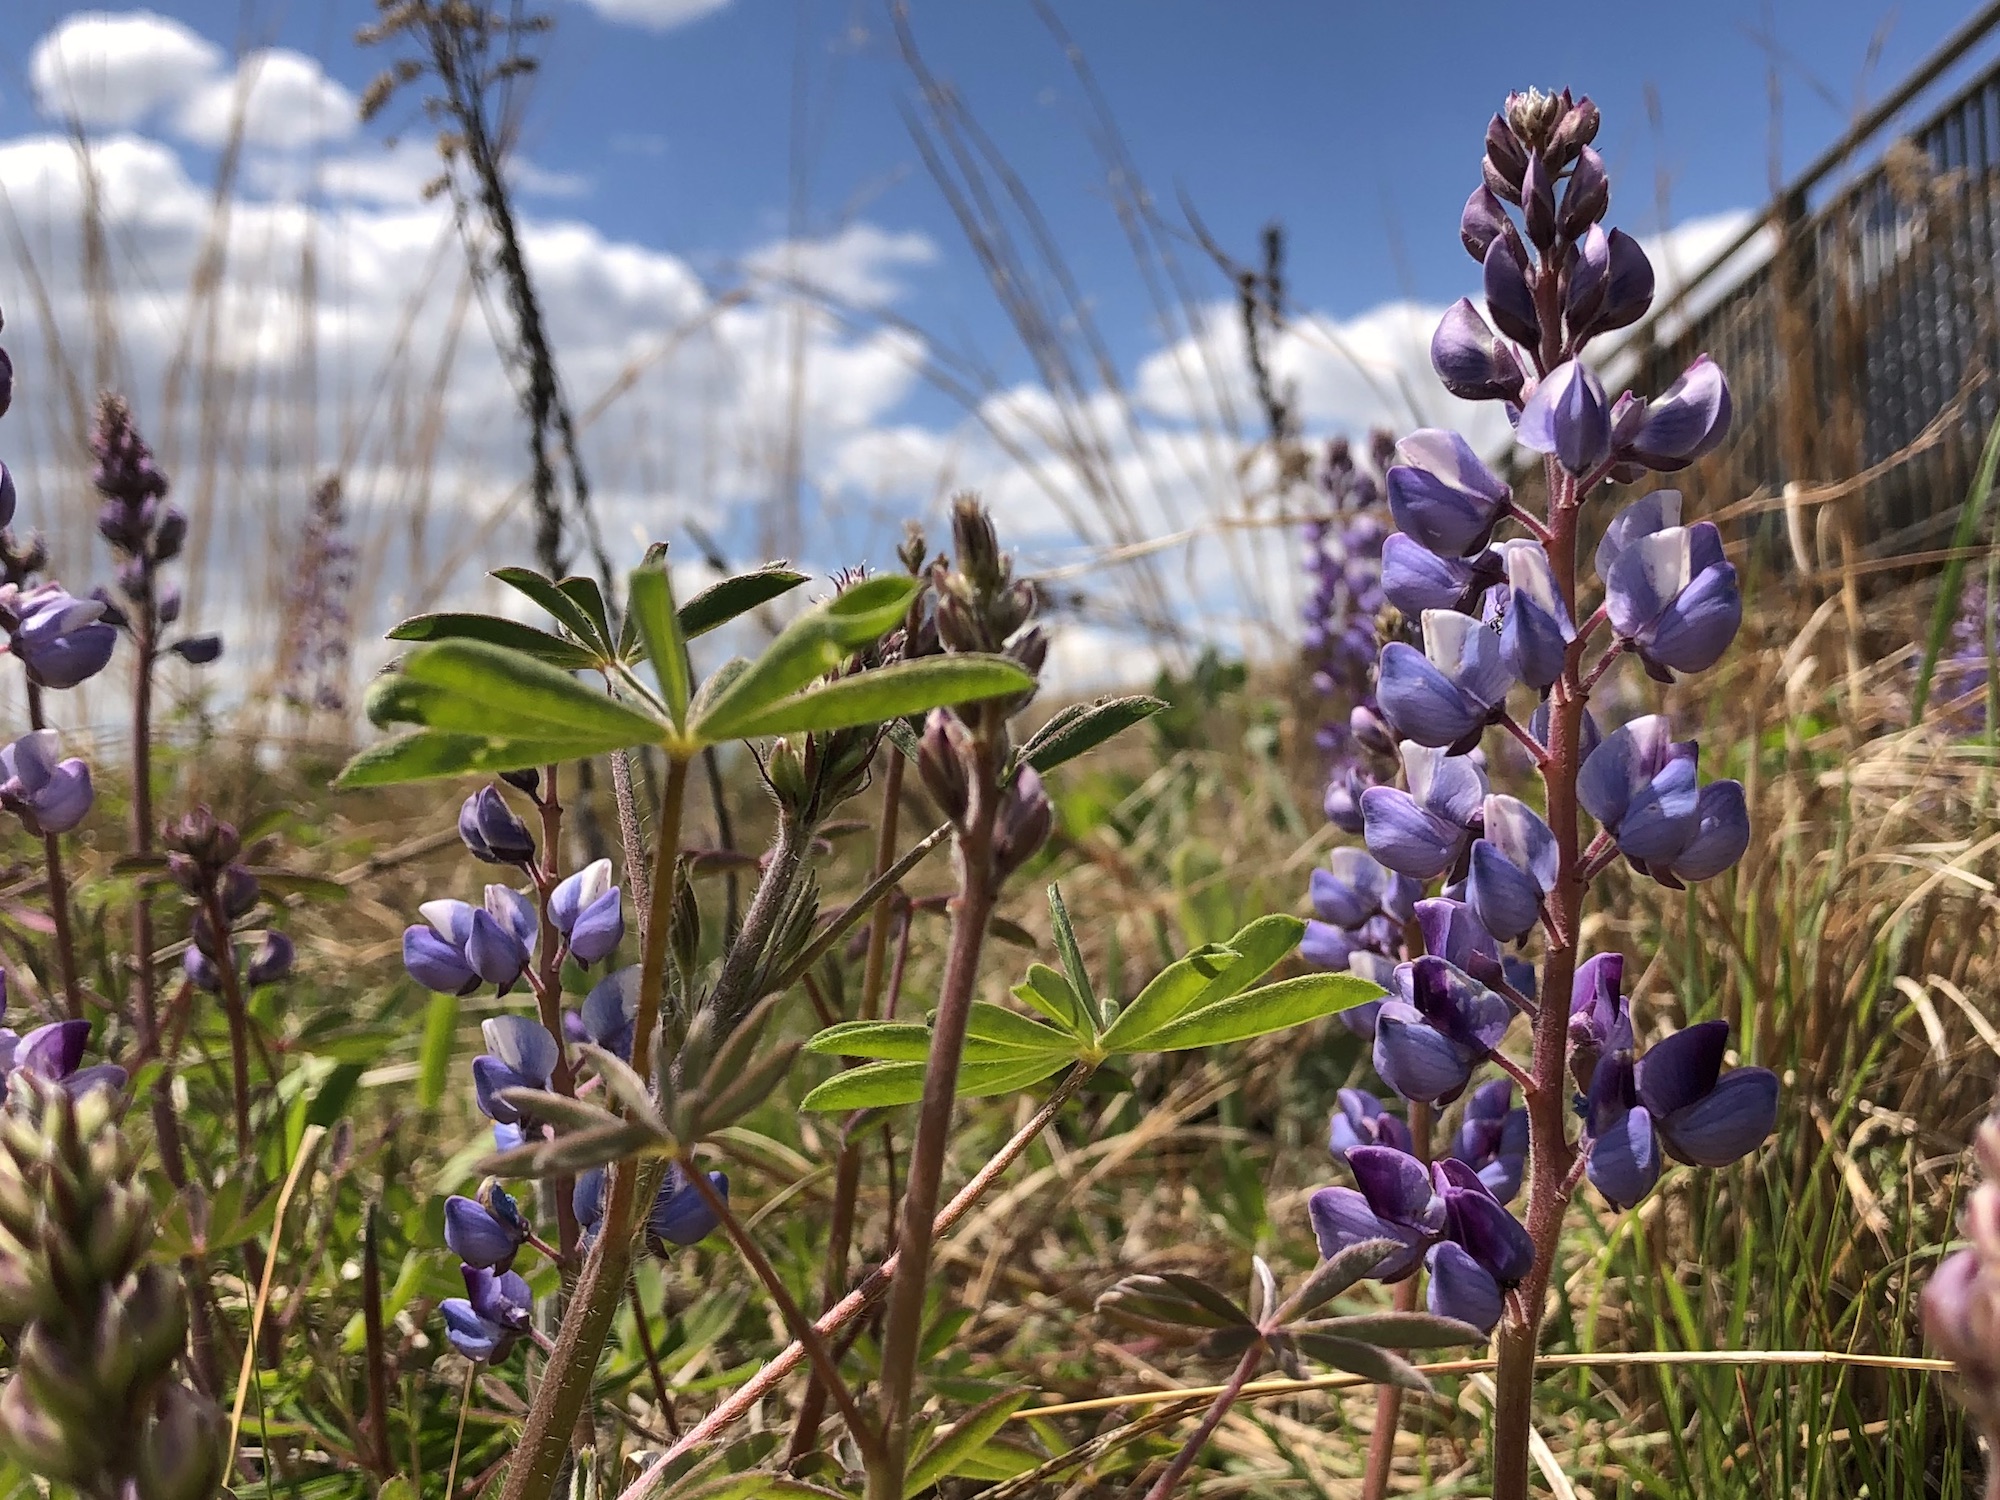 Wild Lupine next to the UW-Madison Arboretum Visitor Center in Madison, Wisconsin on May 13, 2021.